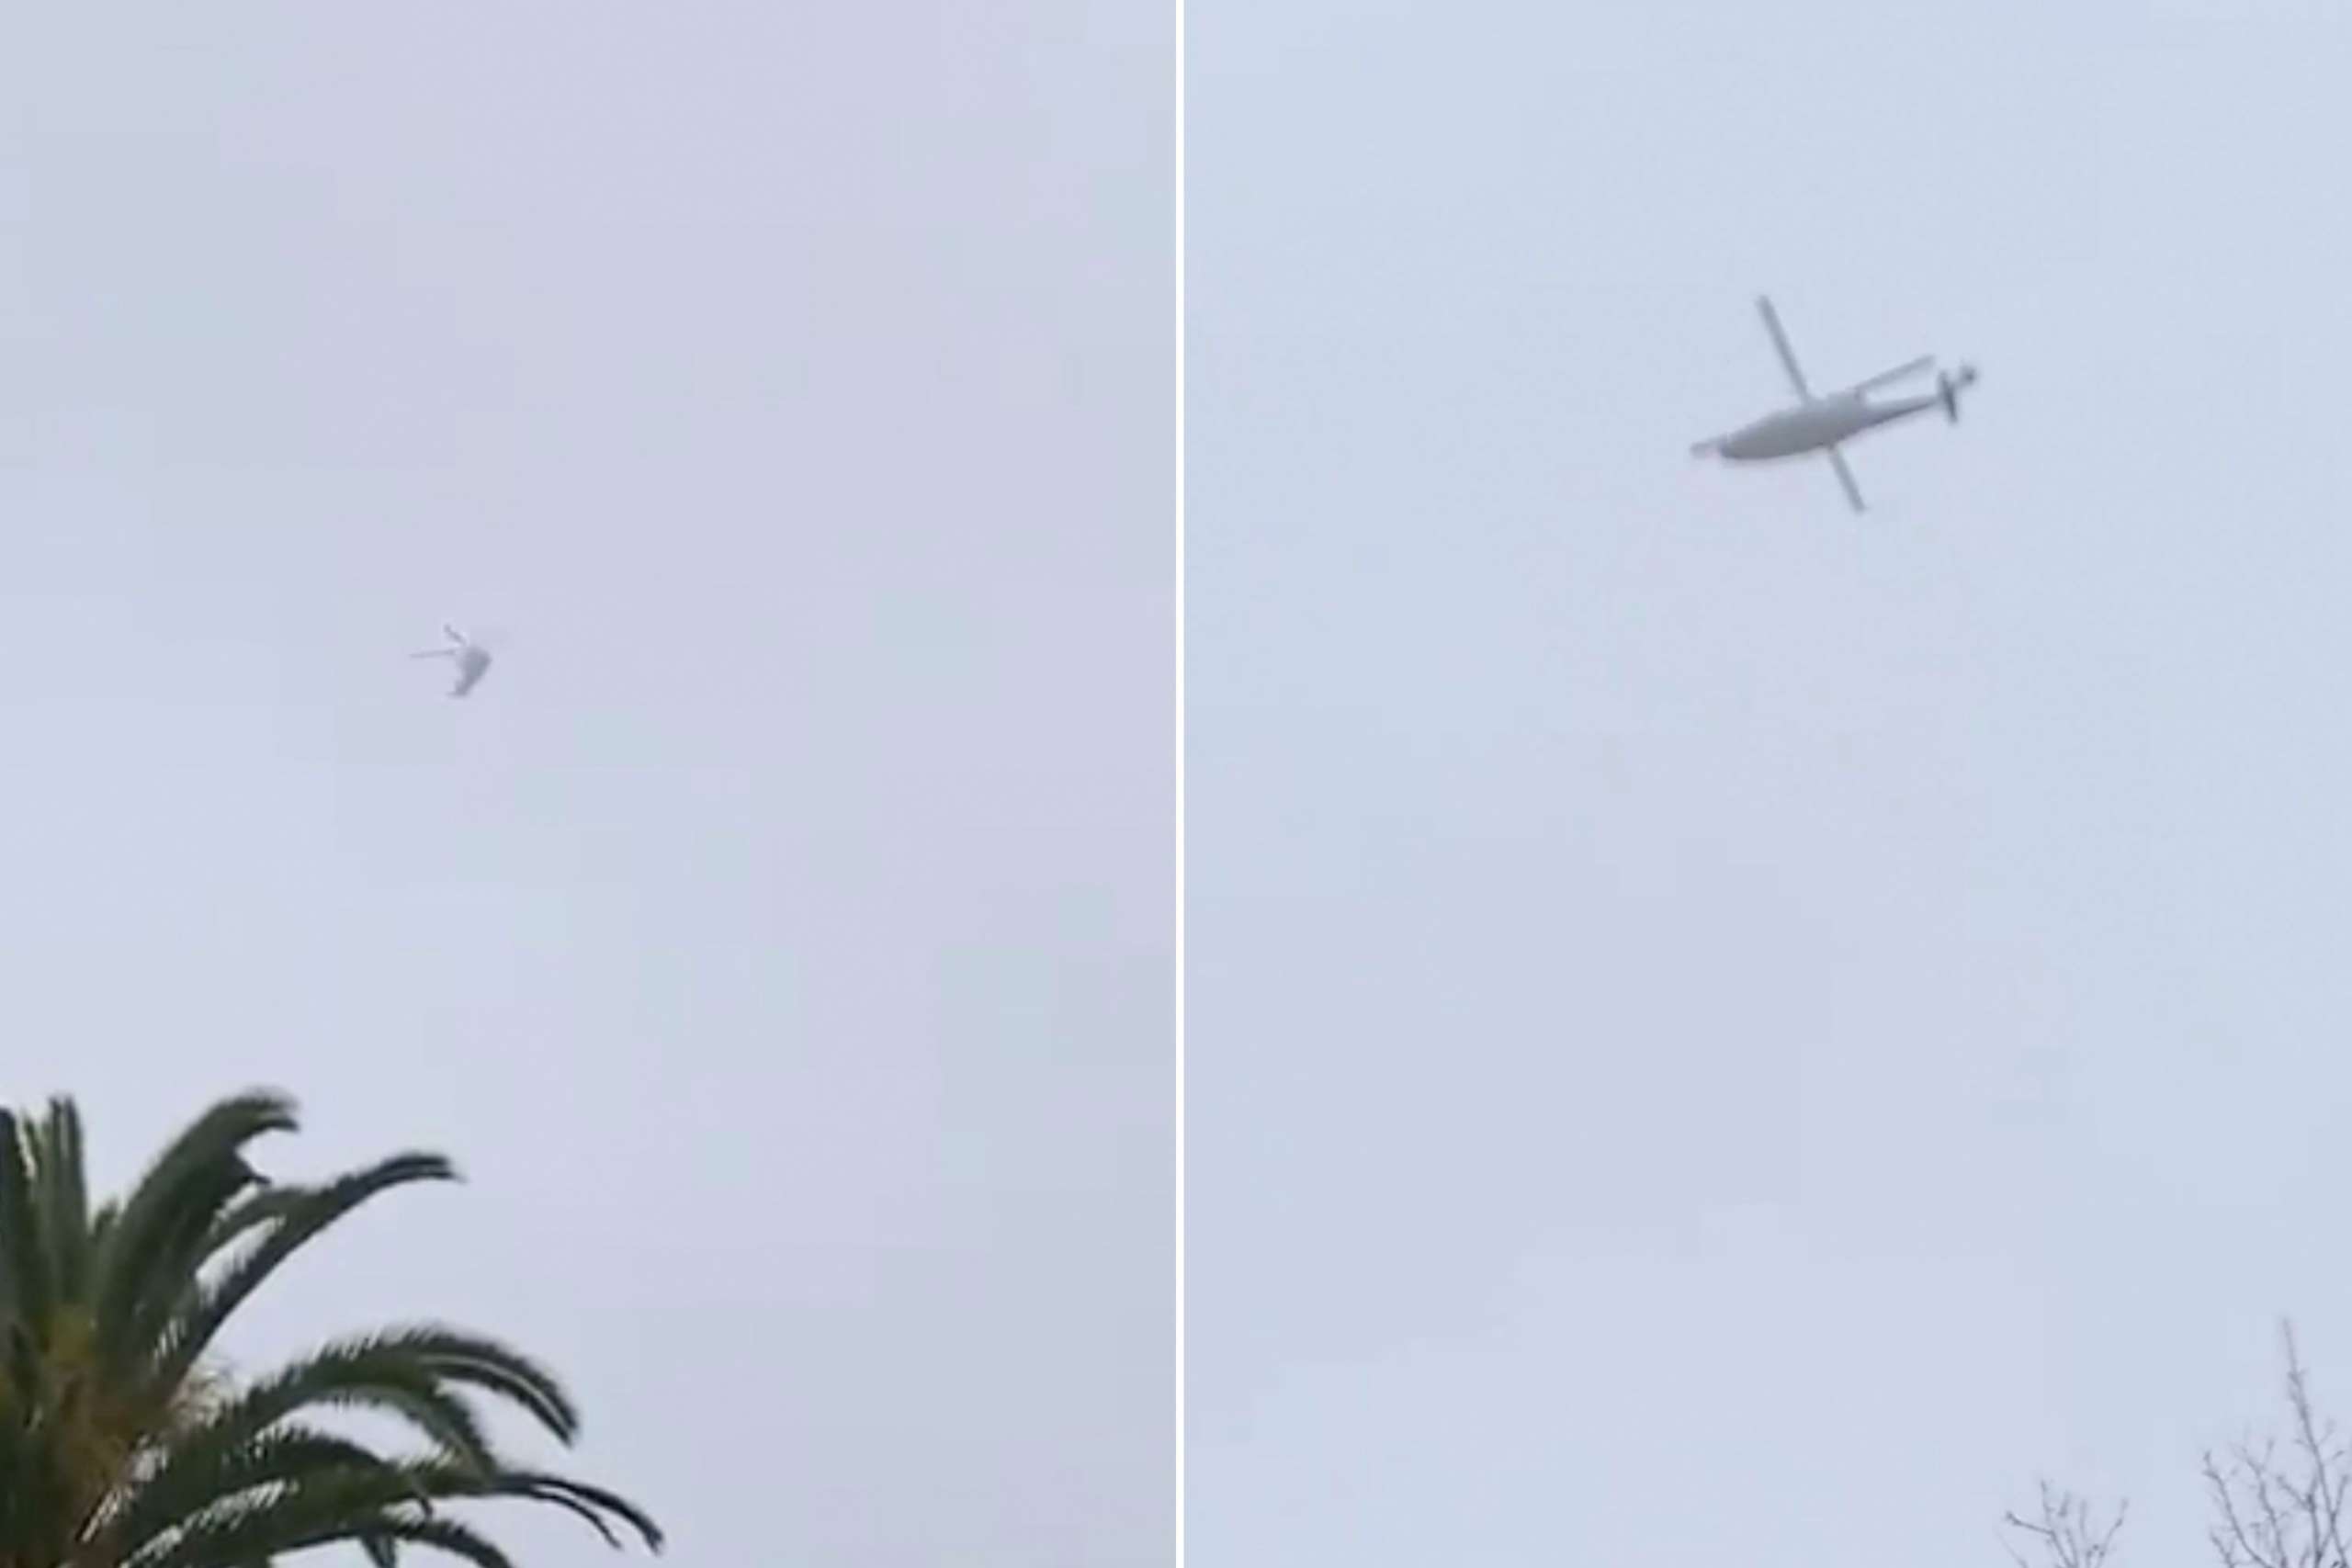 NEW: Video Appears To Show Helicopter Carrying Kobe Bryant Circling